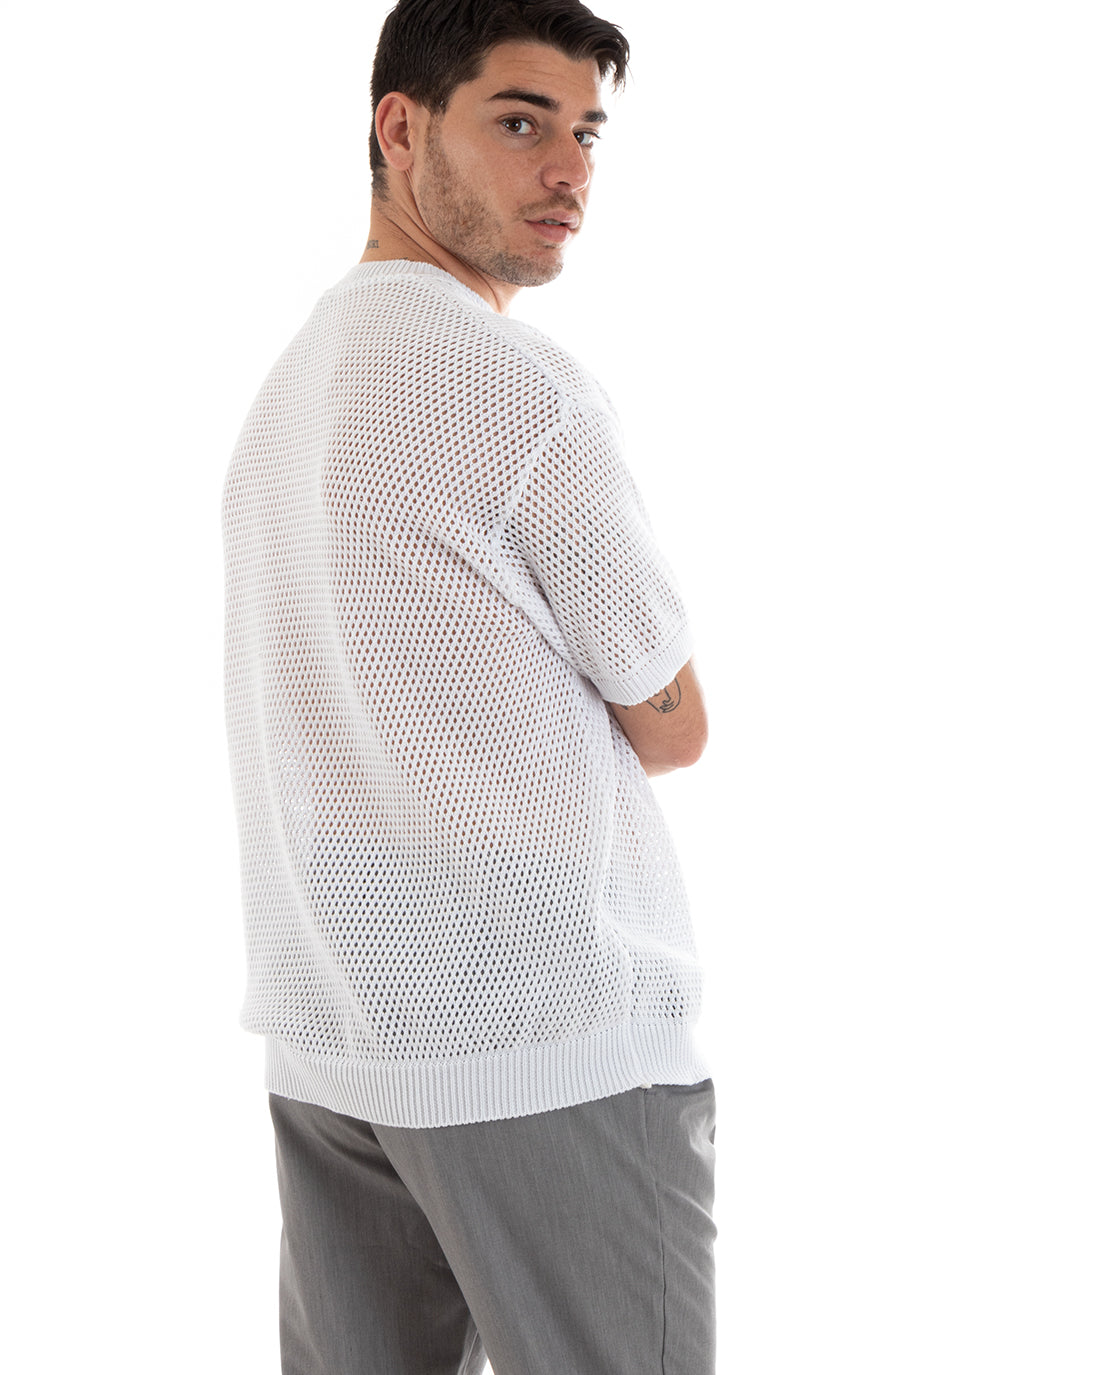 Men's T-shirt Perforated Crew Neck Short Sleeve Solid Color White GIOSAL-TS2894A